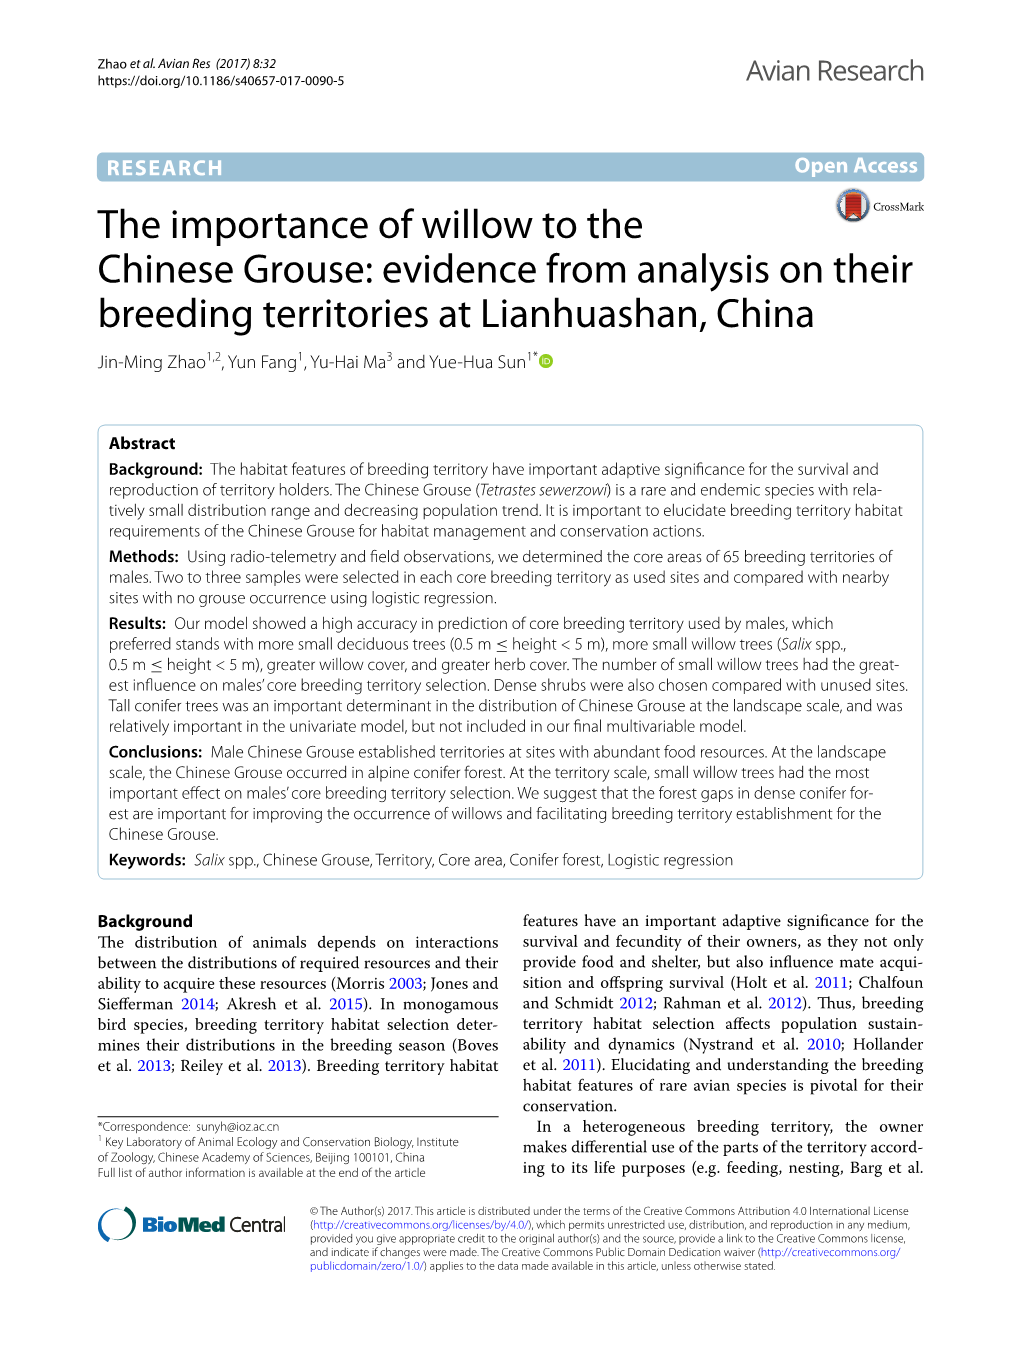 The Importance of Willow to the Chinese Grouse